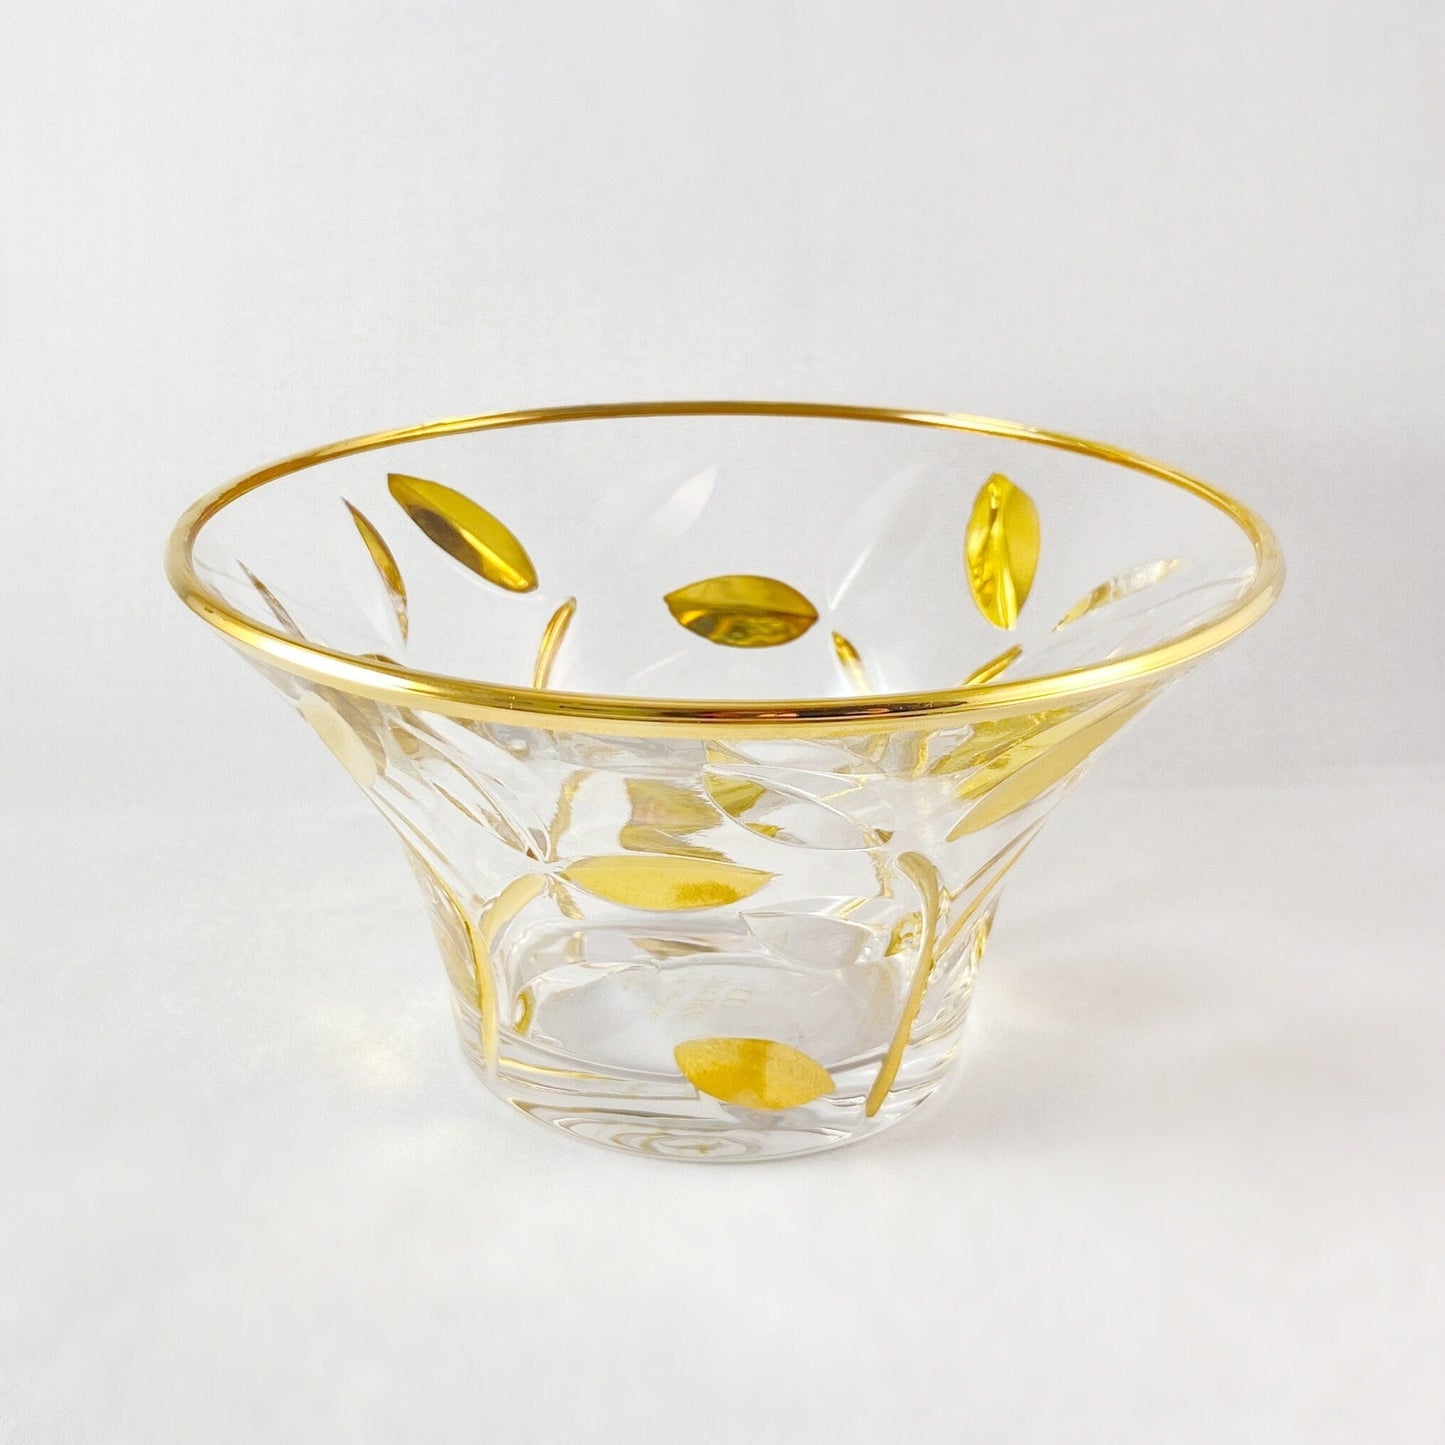 Venetian Glass 24 Kt Gold Tree of Life Dish - Handmade in Italy, Colorful Murano Glass Bowl